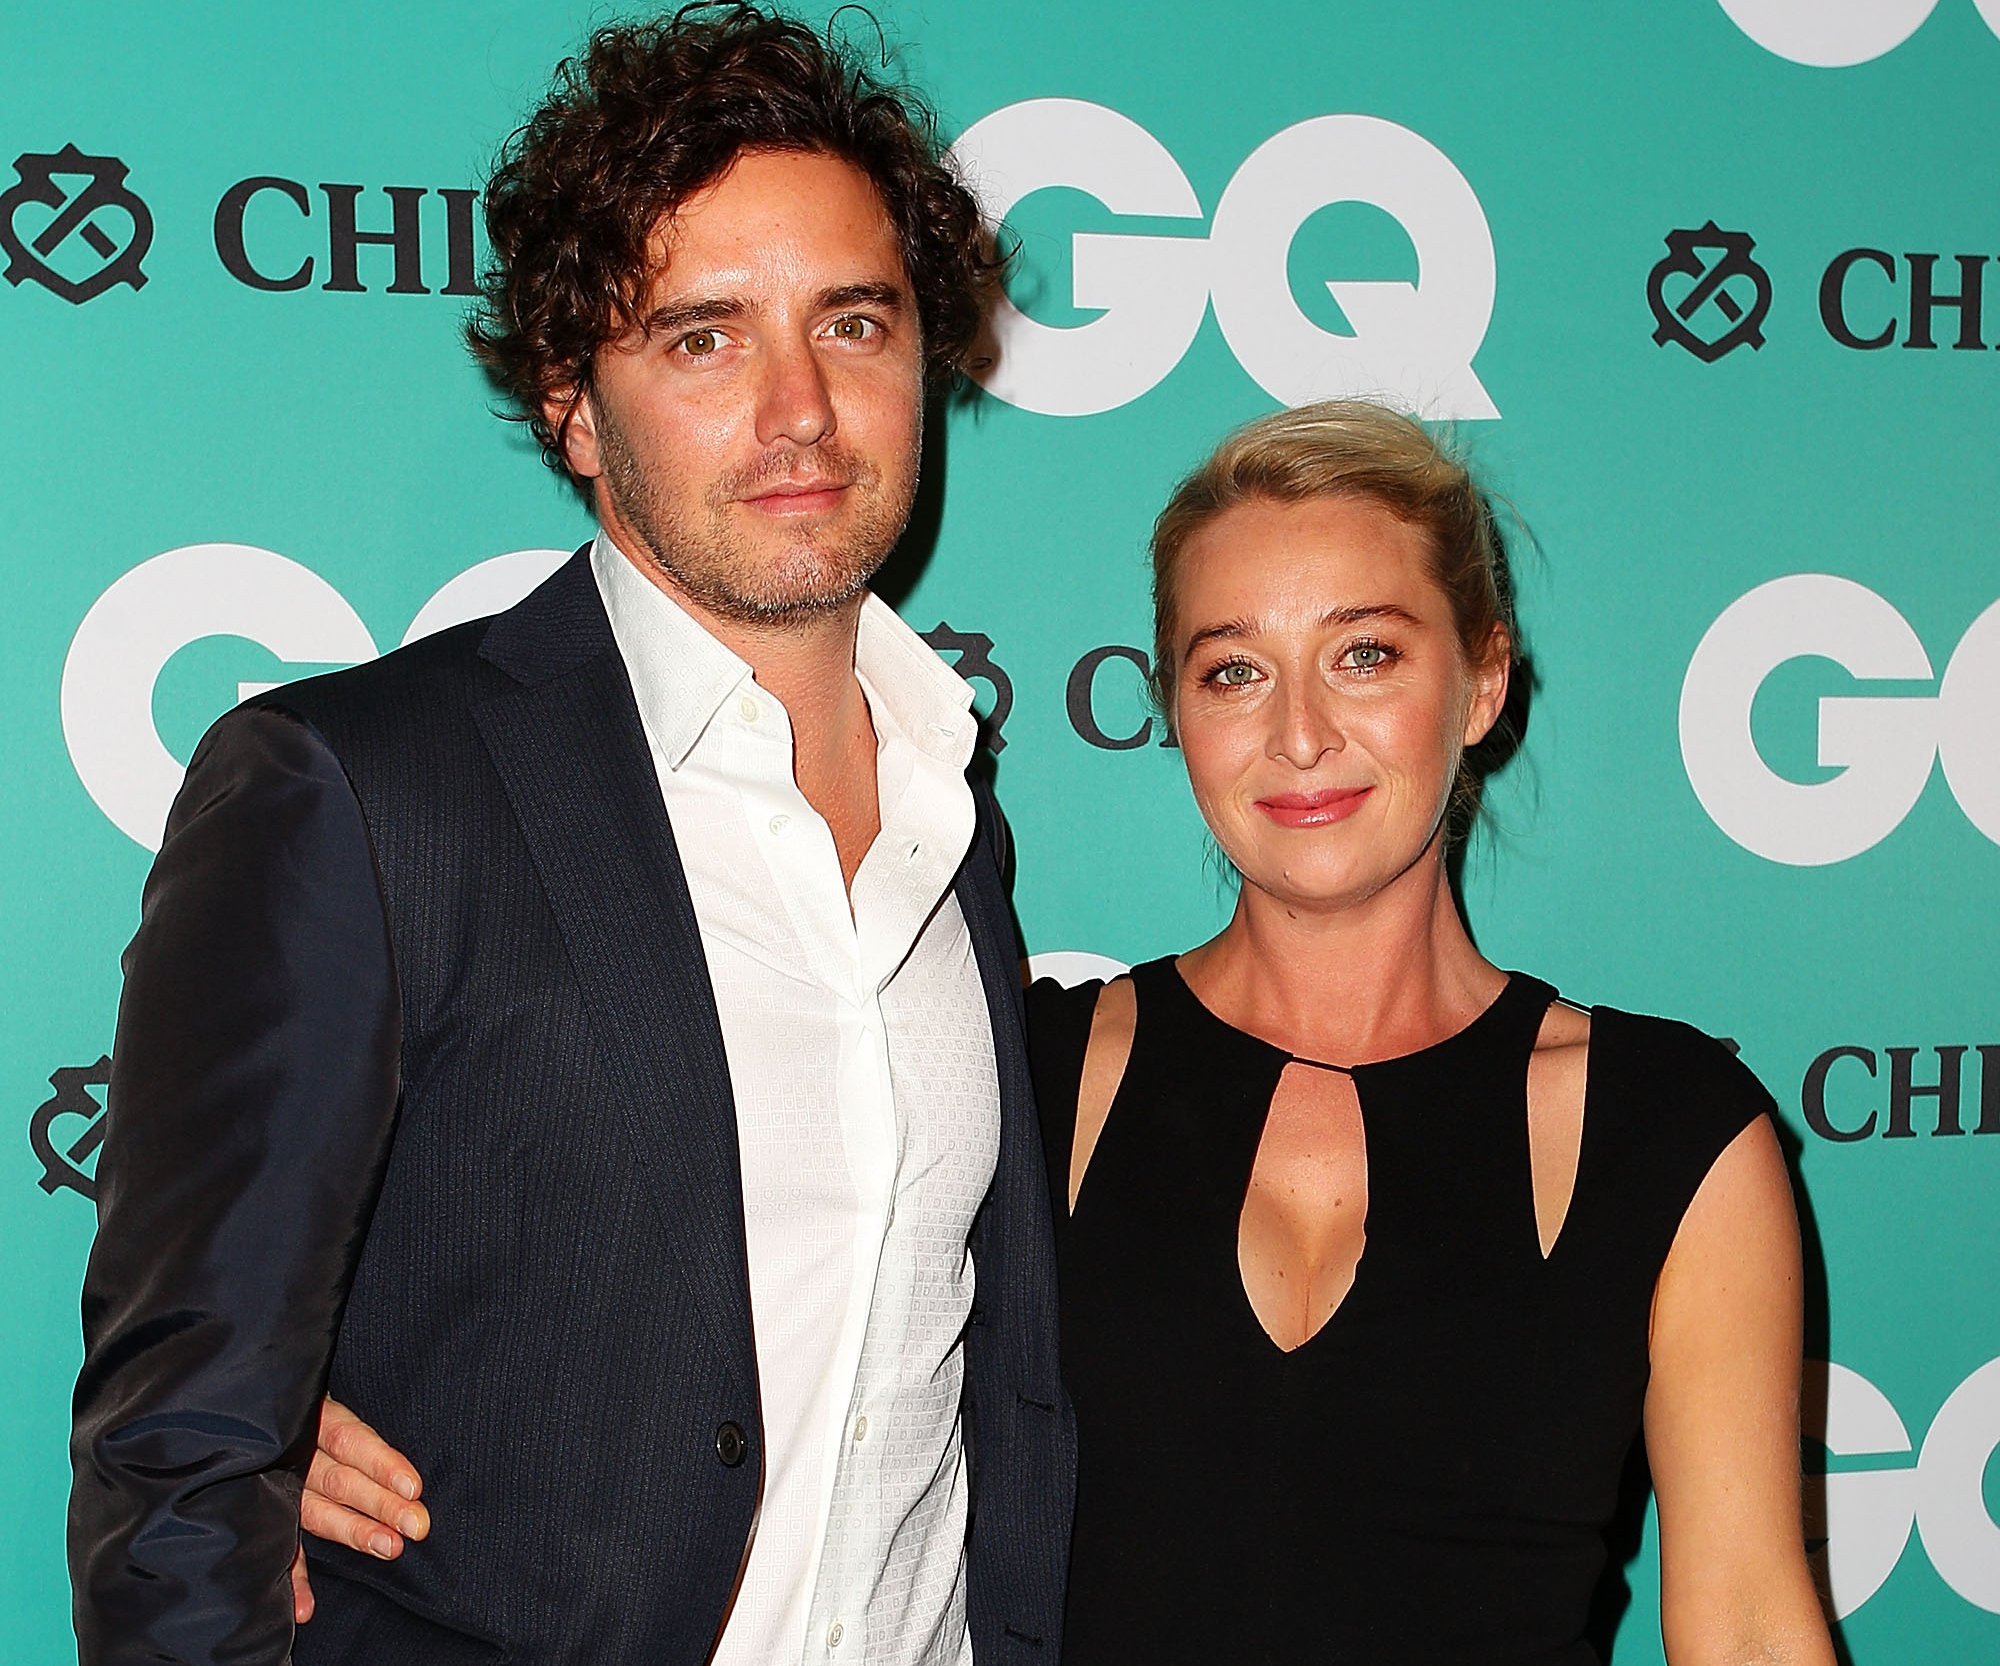 Asher Keddie shares adorable pictures of her family